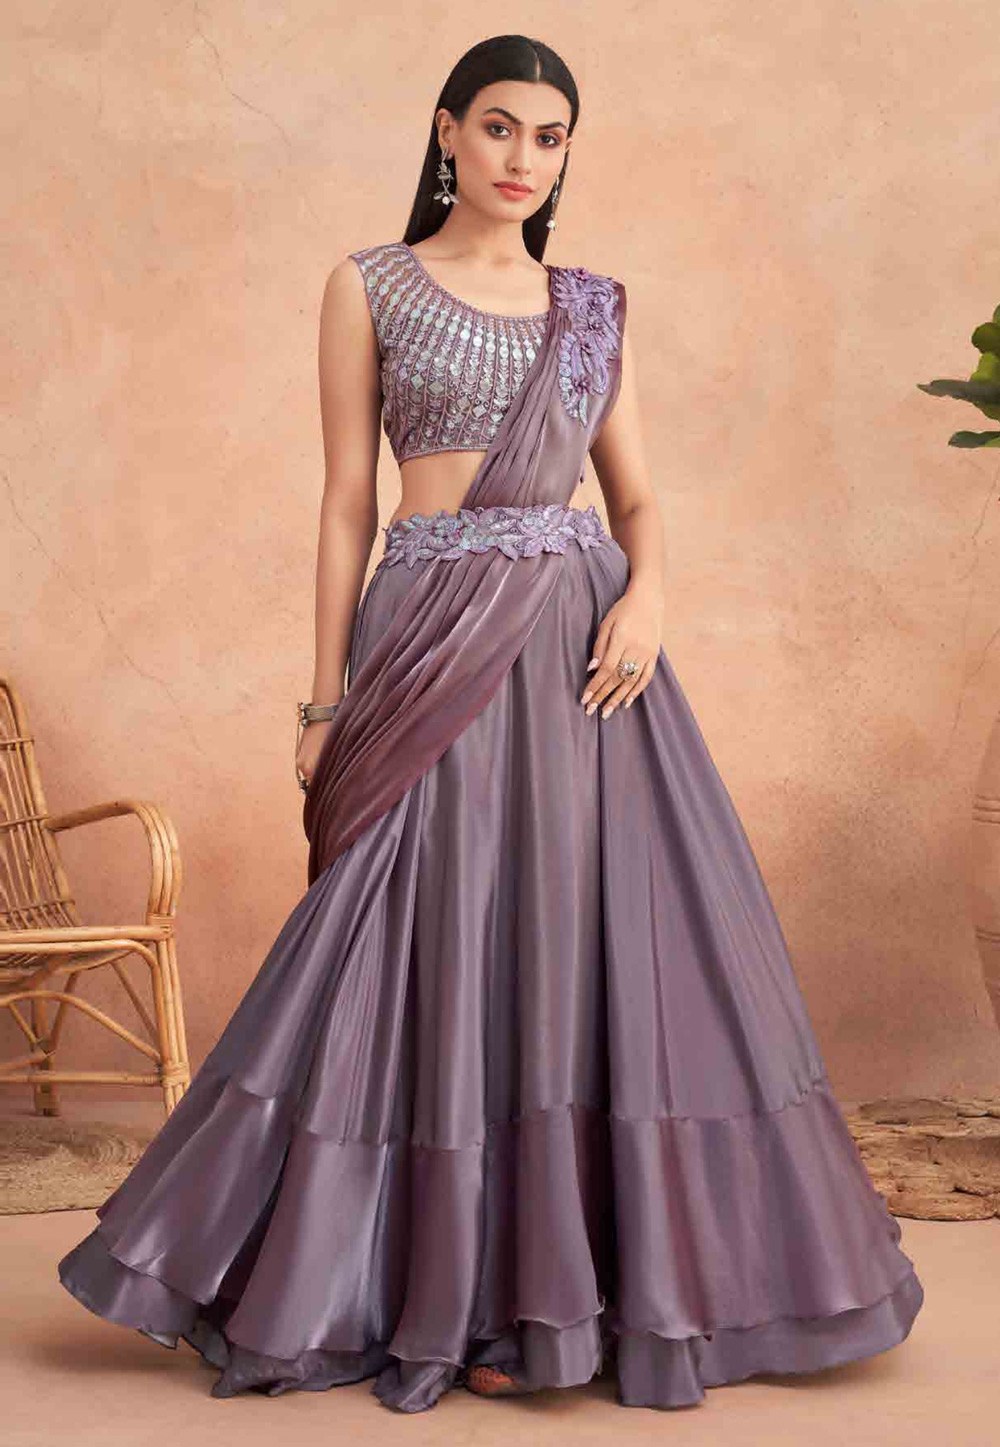 Bal South Indian Lehenga Choli For Women Accessories - Buy Bal South Indian  Lehenga Choli For Women Accessories online in India